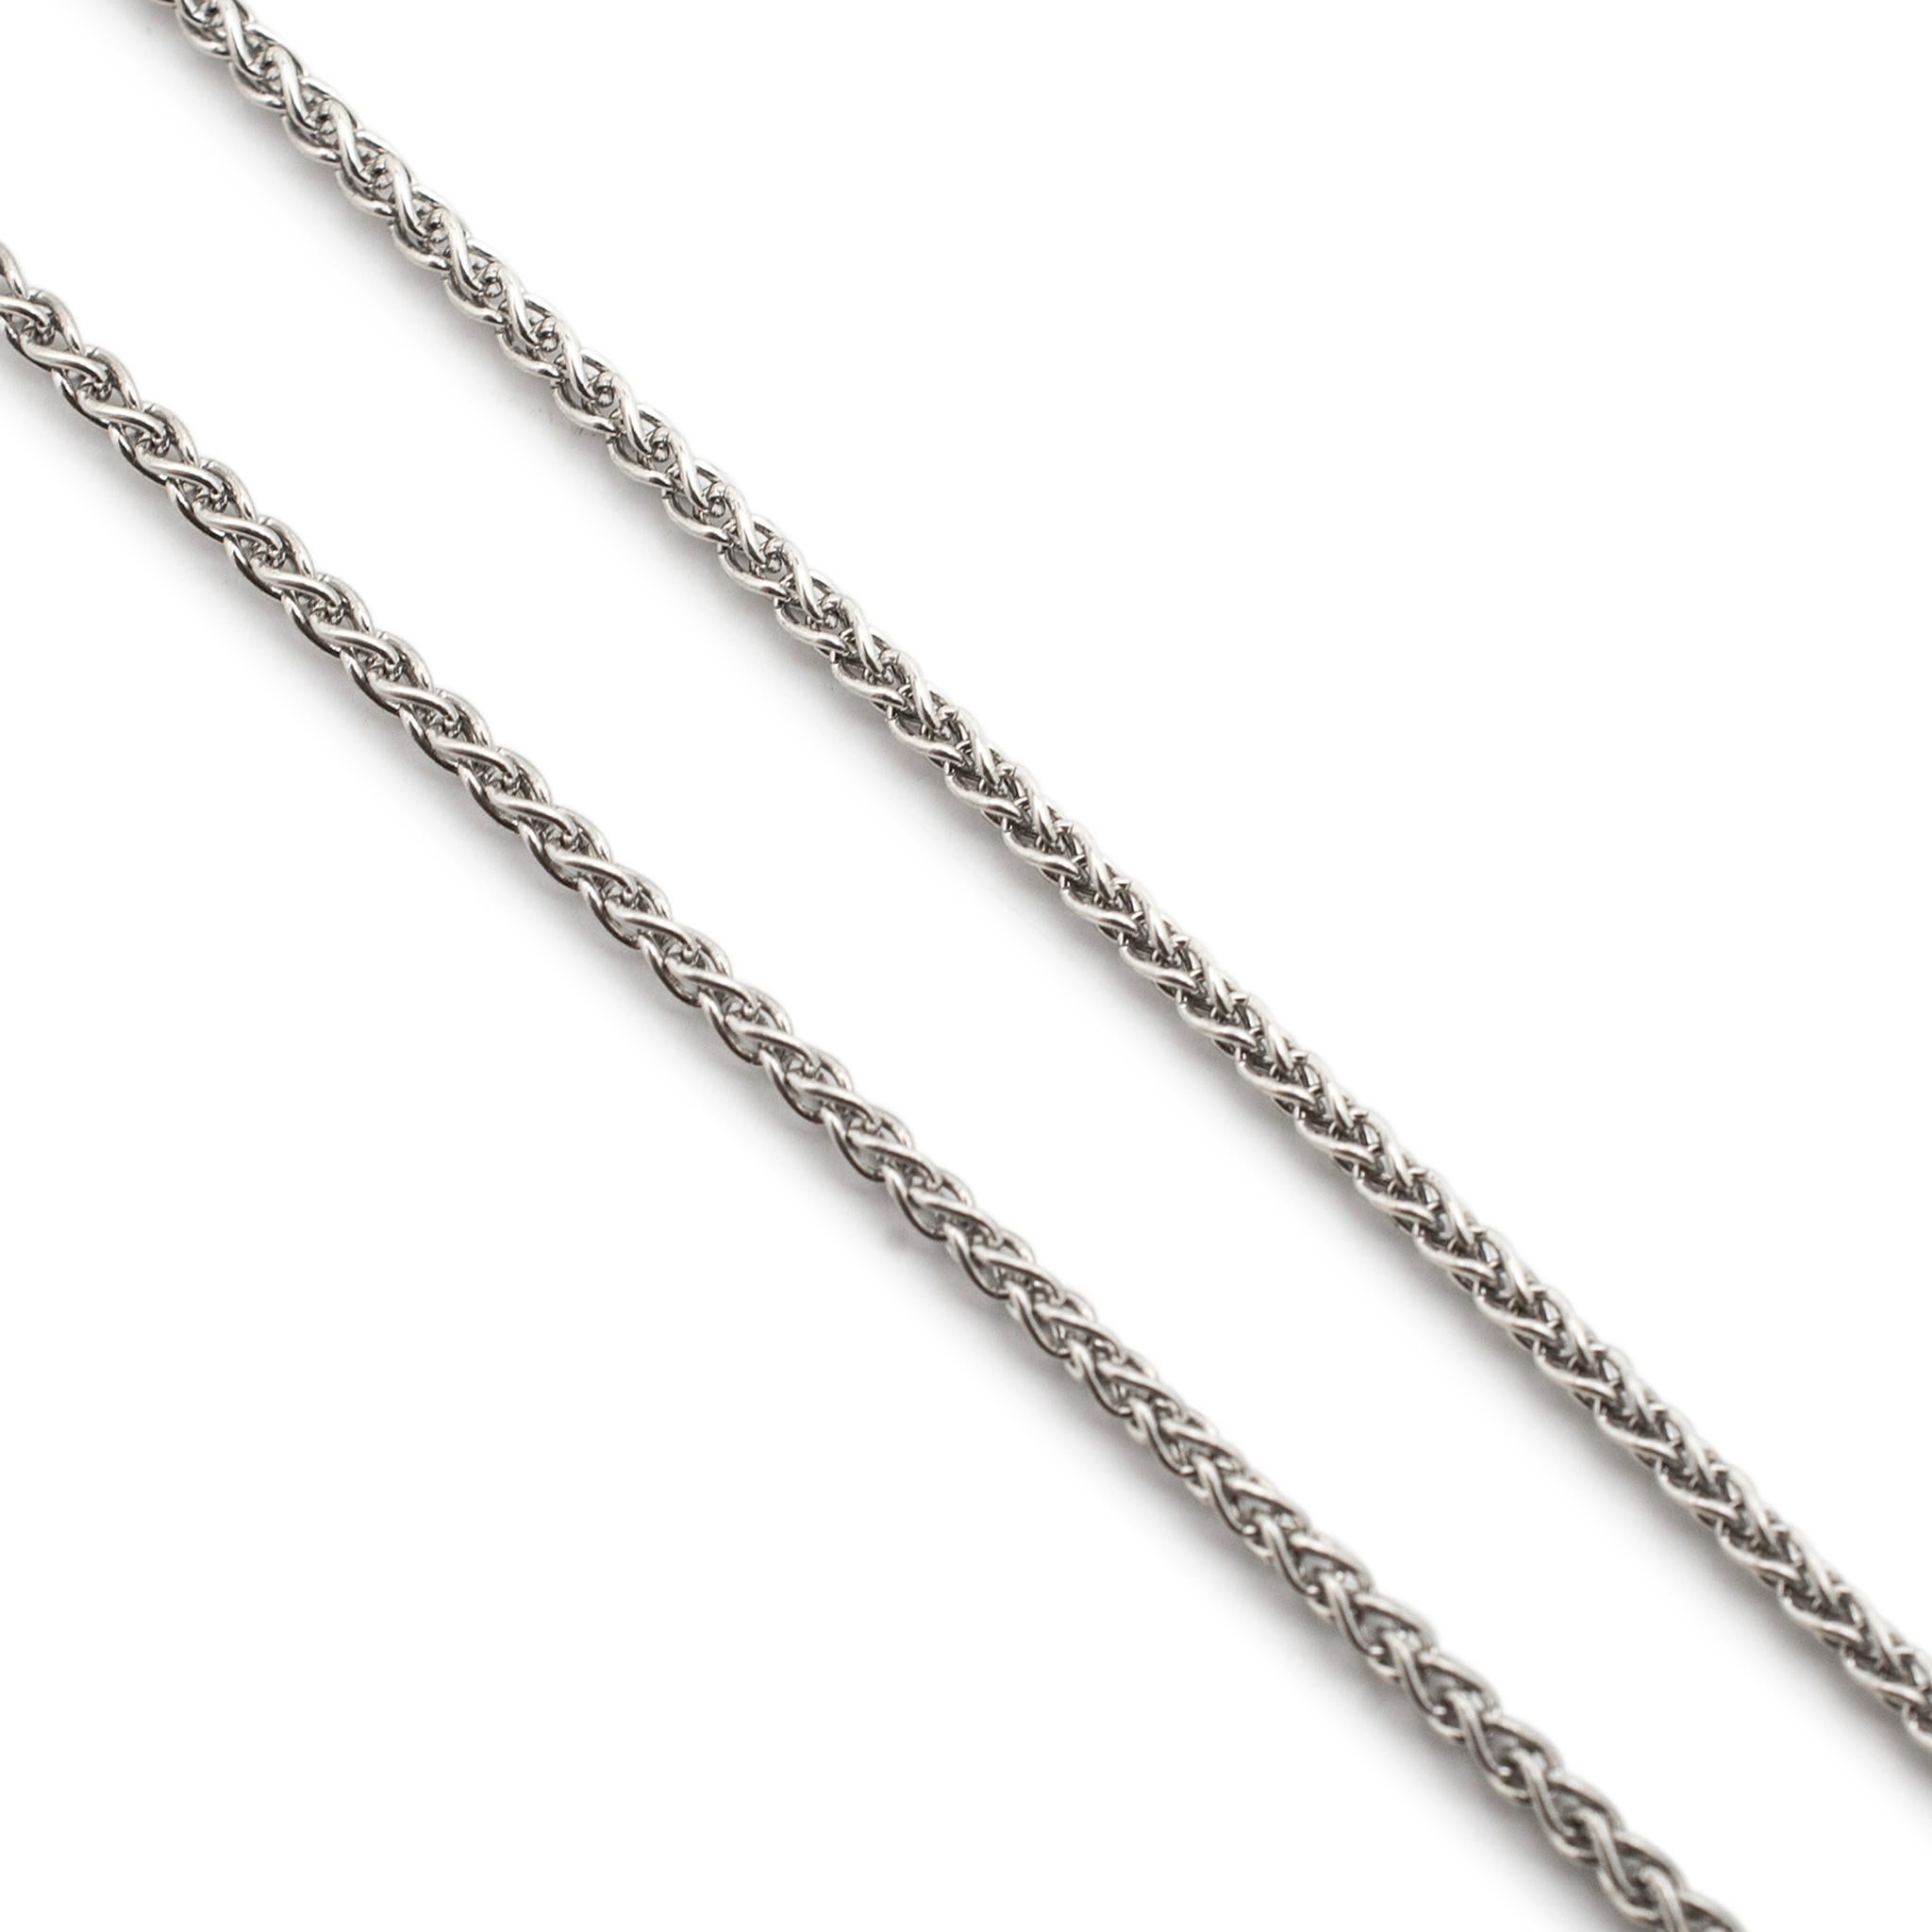 Brand: James Avery

Gender: Ladies

Length: 16.00 inches

Width: 1.20 mm

Pendant measures: 52mm x 44mm

Weight: 22.28 grams

Ladies JAMES AVERY silver single strand uniform link necklace.  Stamped 